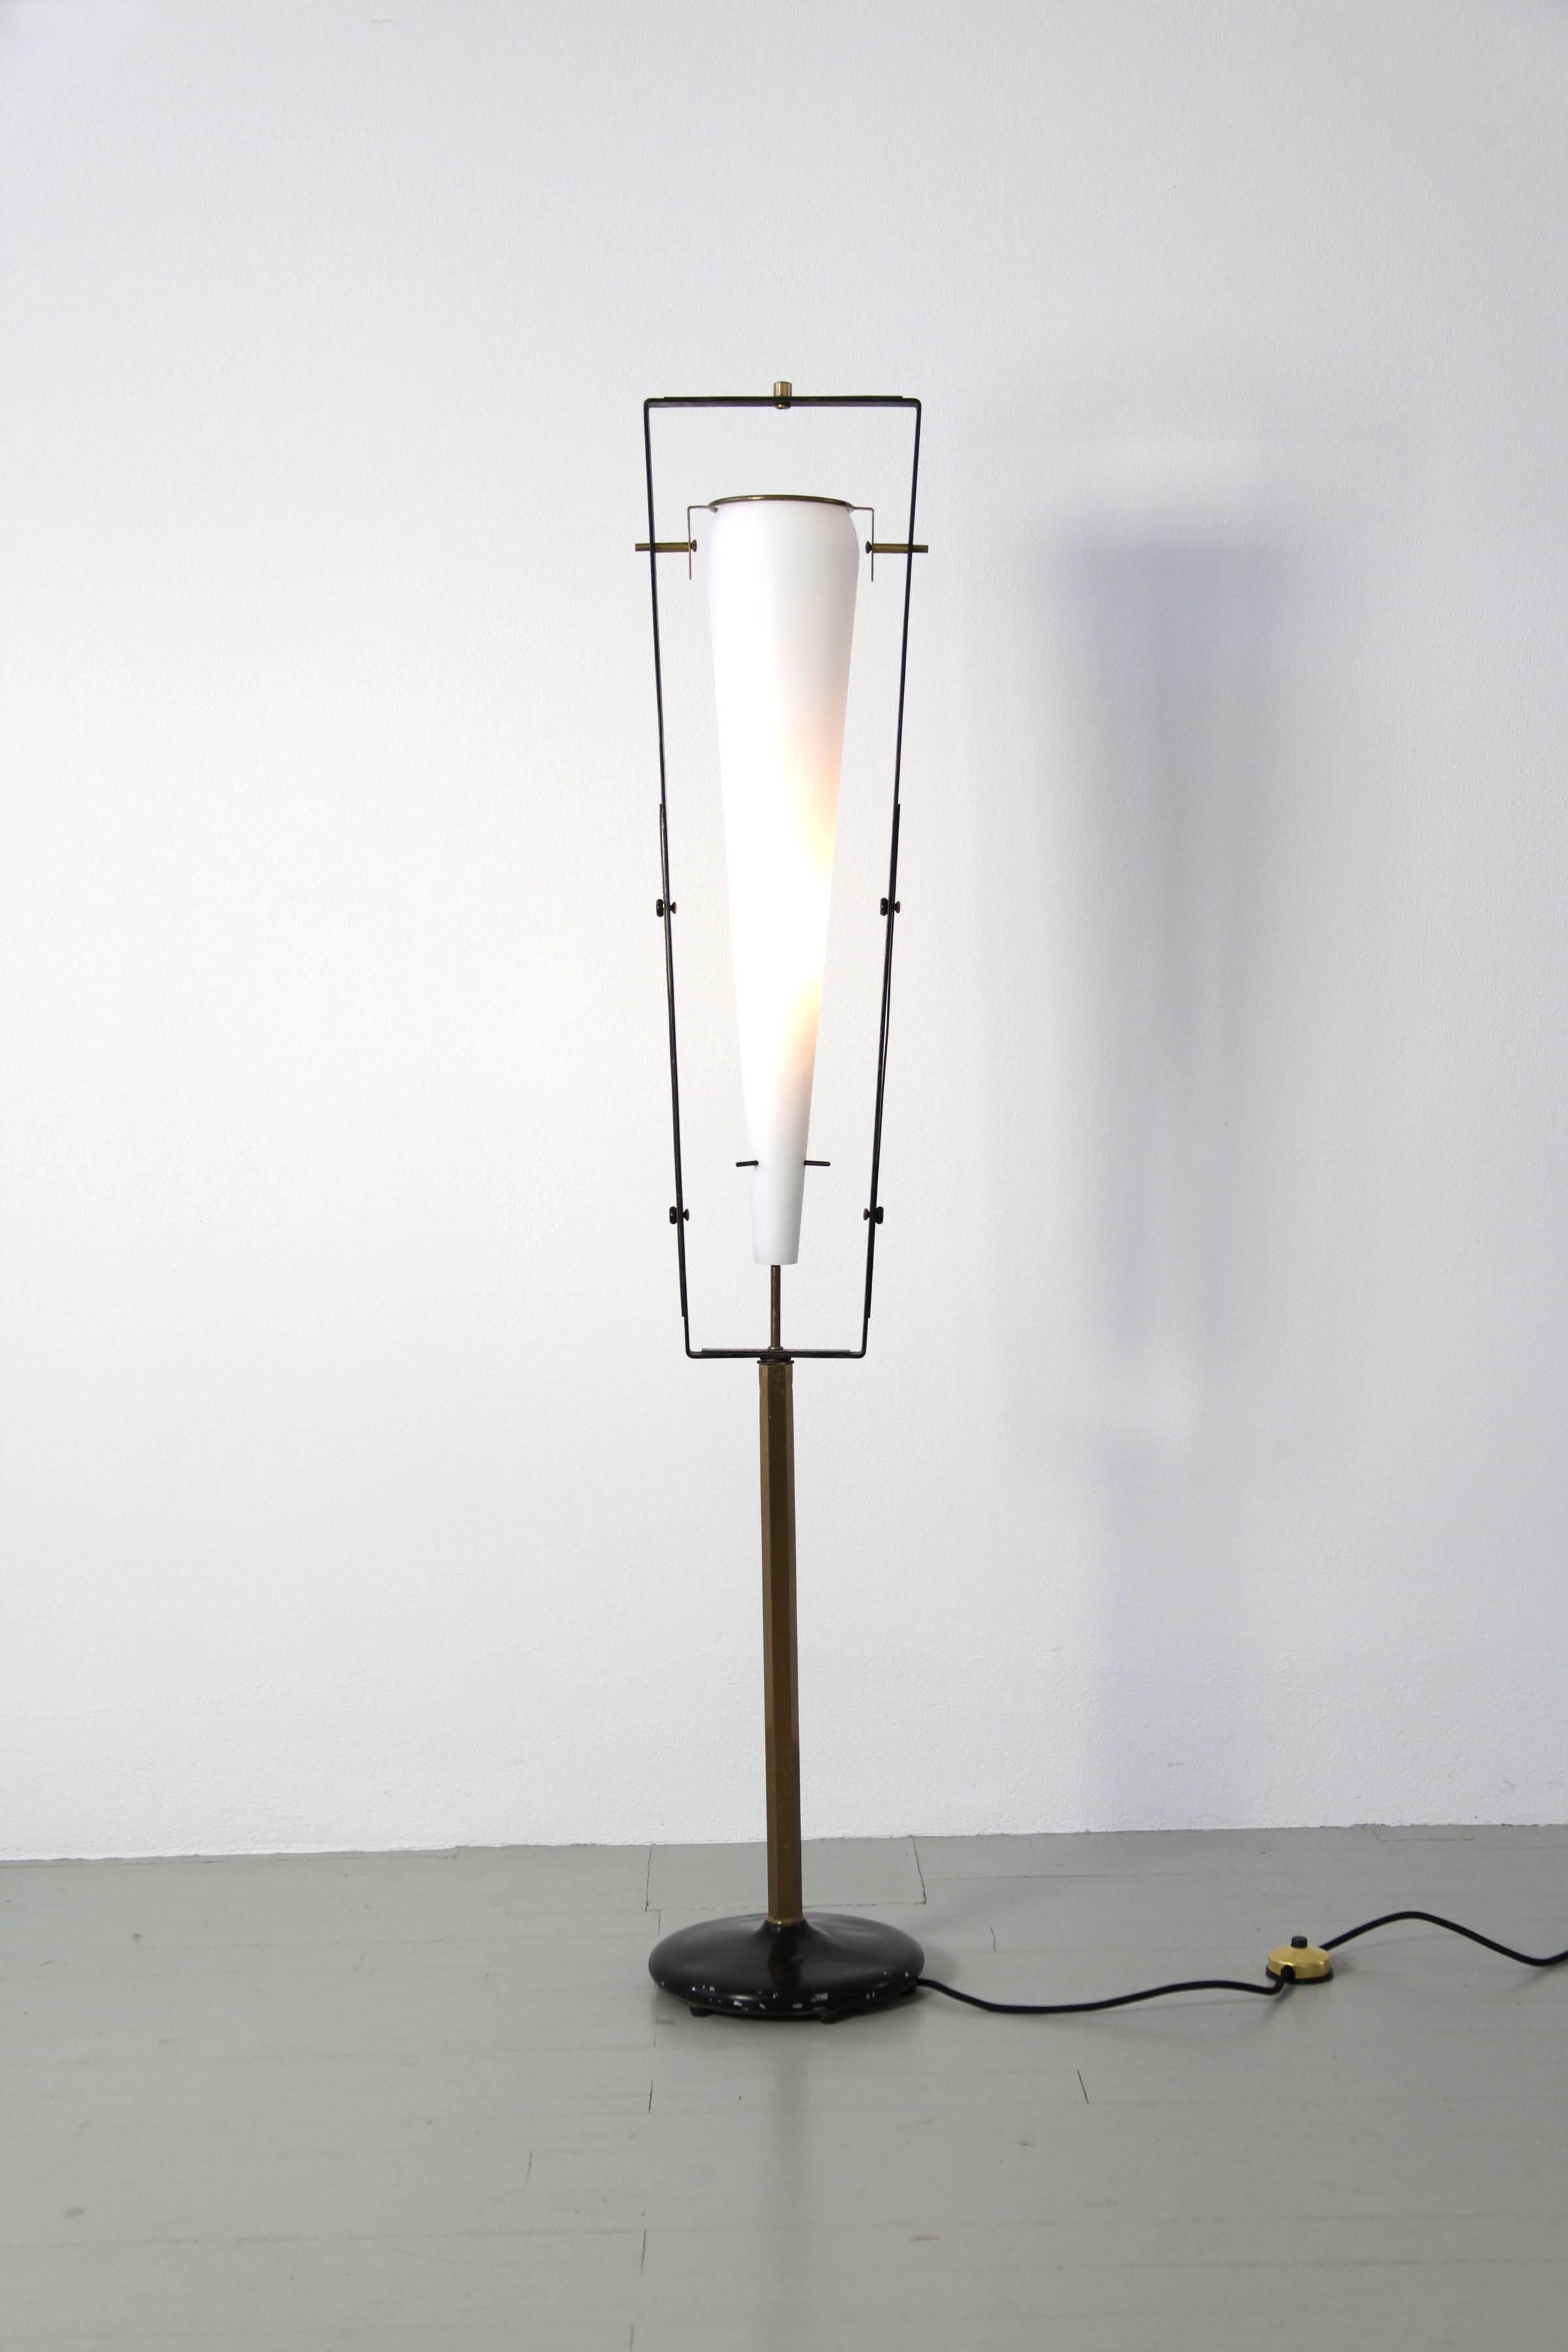 A captivating piece from the 1950s, this floor lamp is a creation of Gilardi & Barzaghi, renowned designers from Italy. Its design features a large satinated glass shade delicately nestled within a framework crafted from brass, exuding a harmonious